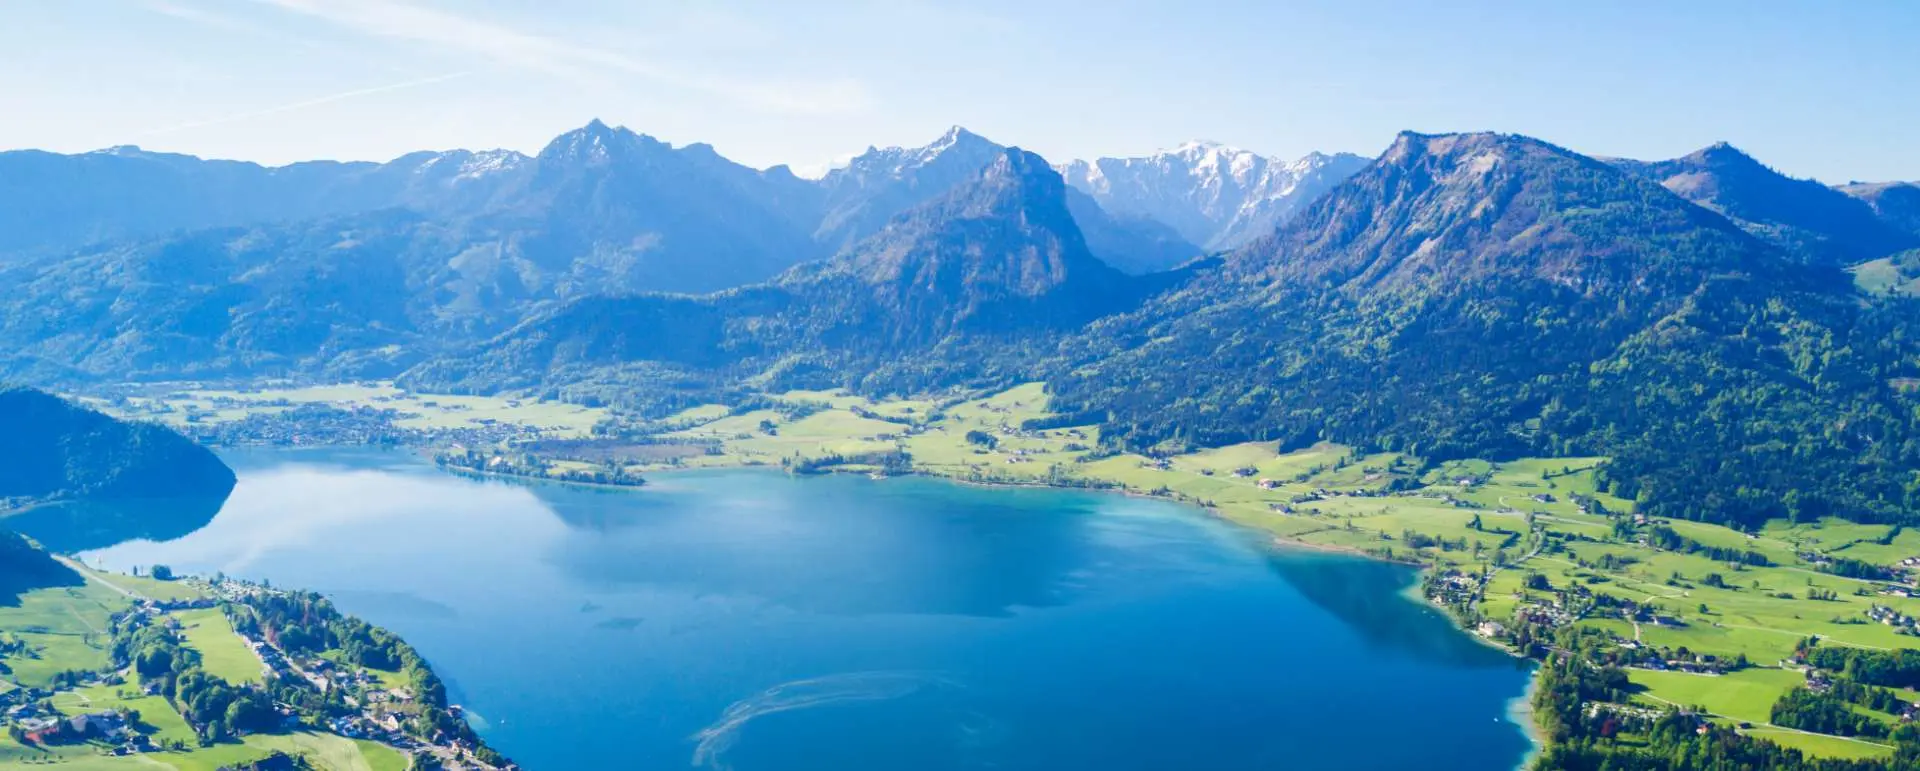 Wolfgangsee Lake - the destination with large hotels